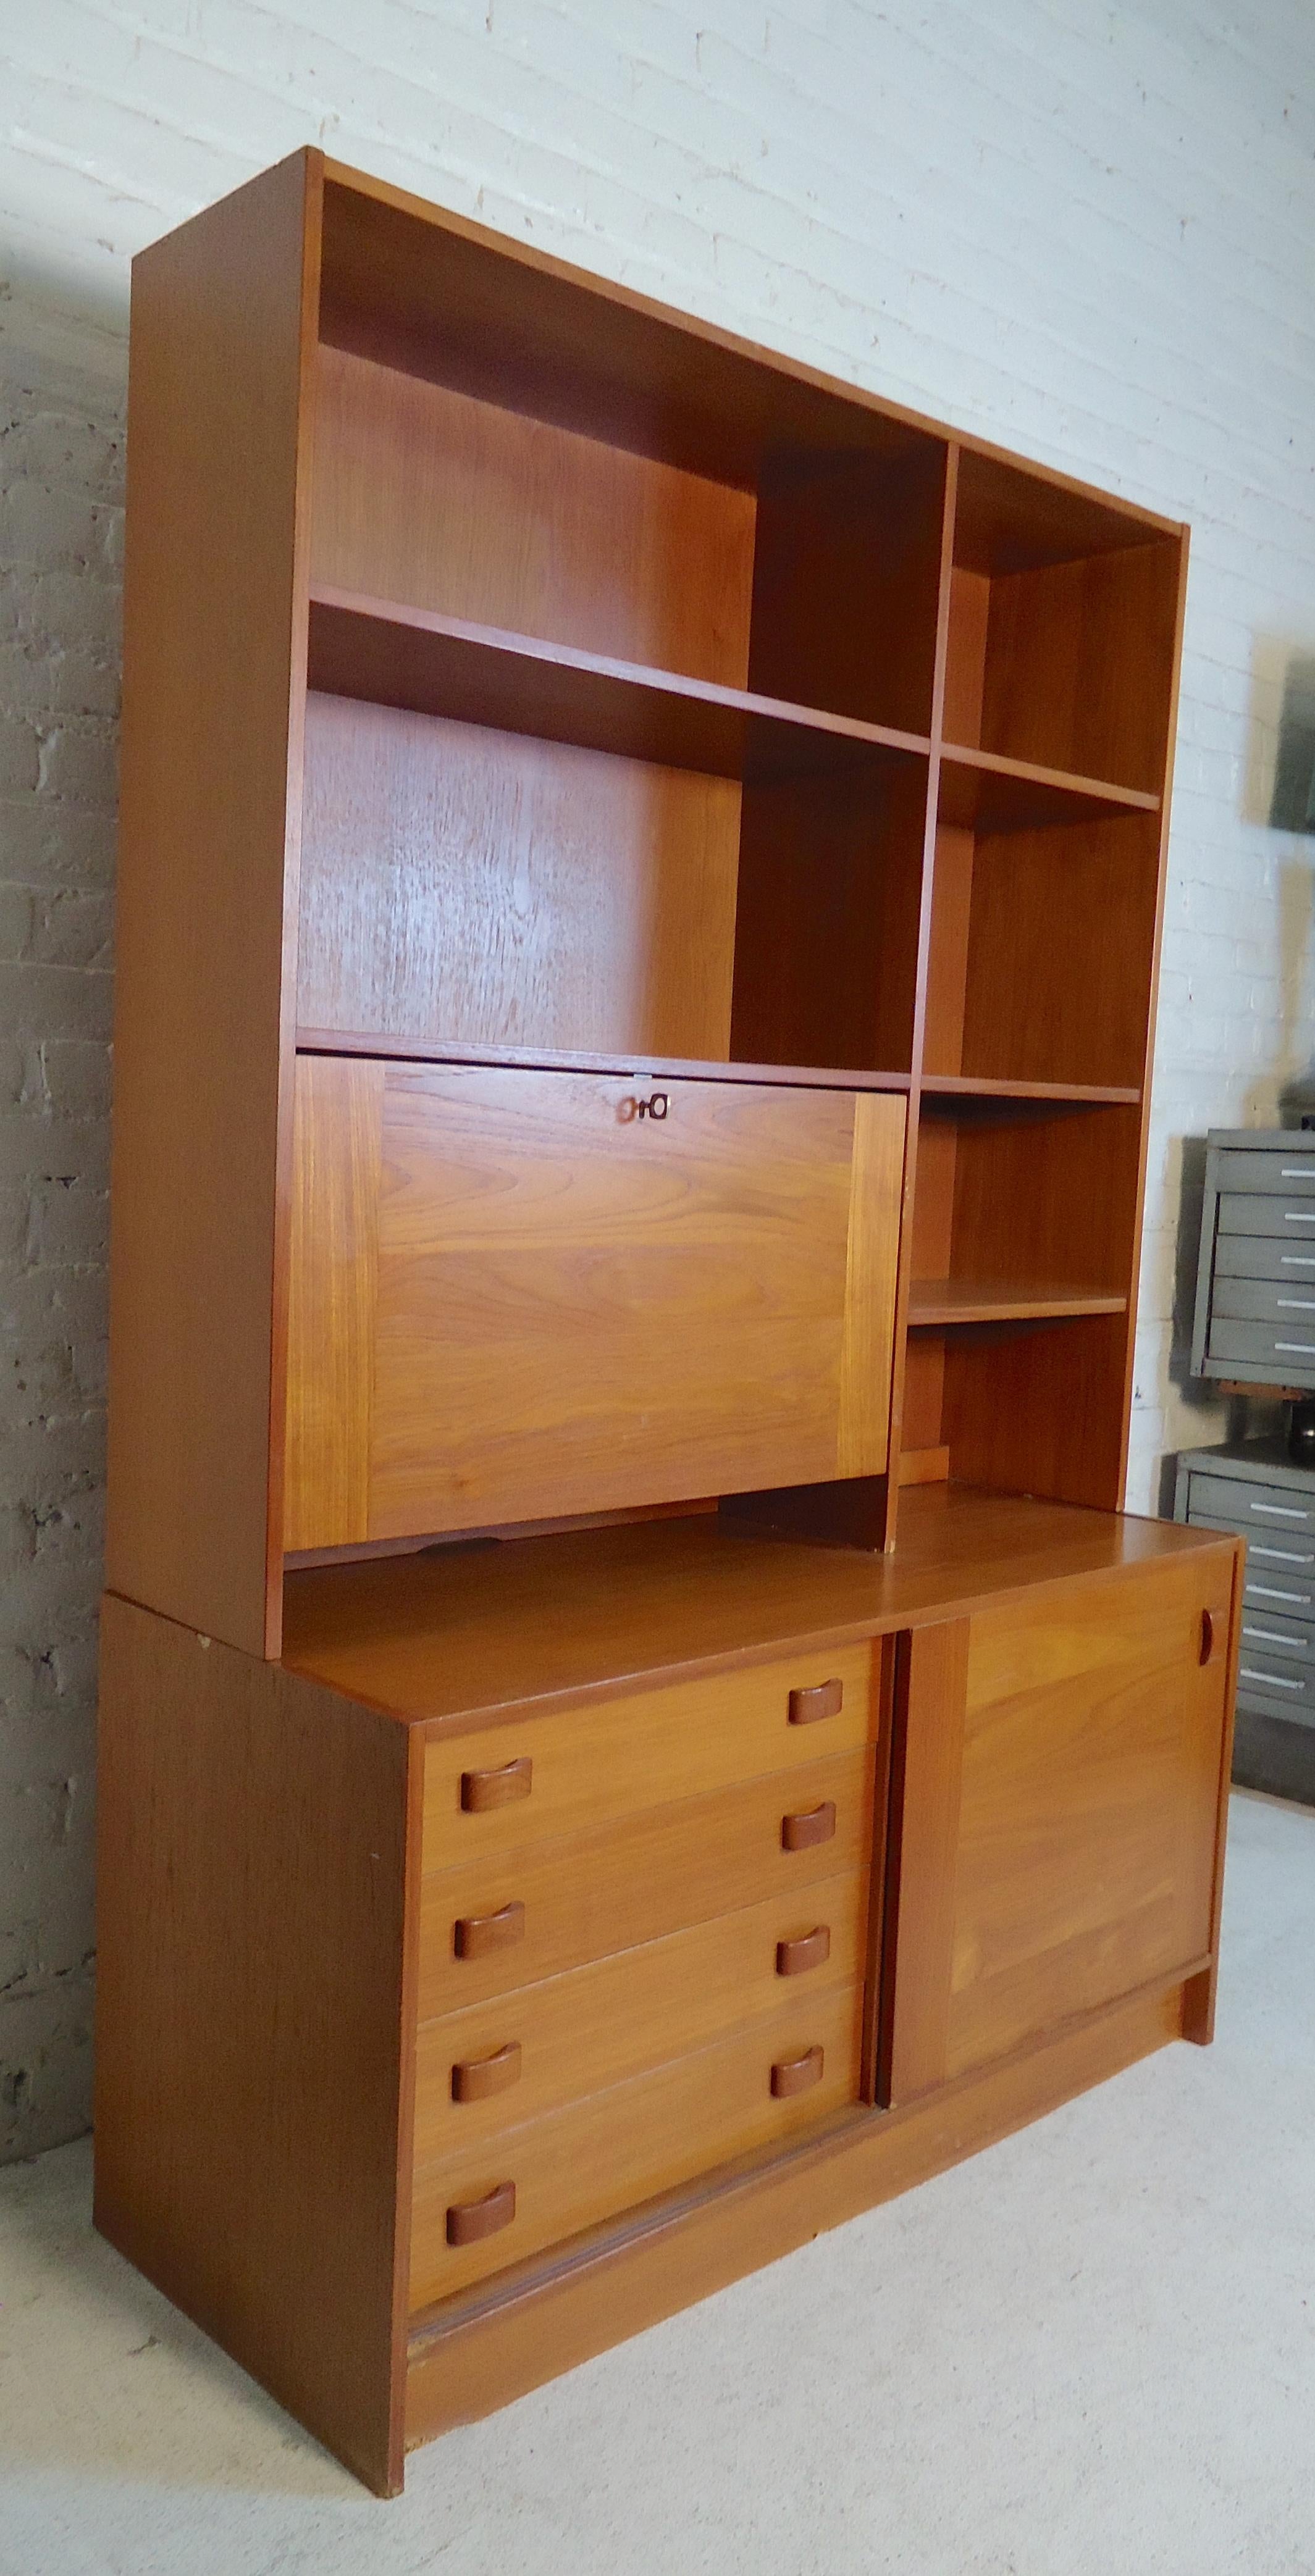 Teak grain cabinet with bookcase topper. Features ample storage with drawers, shelving, pull down cabinet and sliding door cabinet.
(Please confirm item location - NY or NJ - with dealer).
 